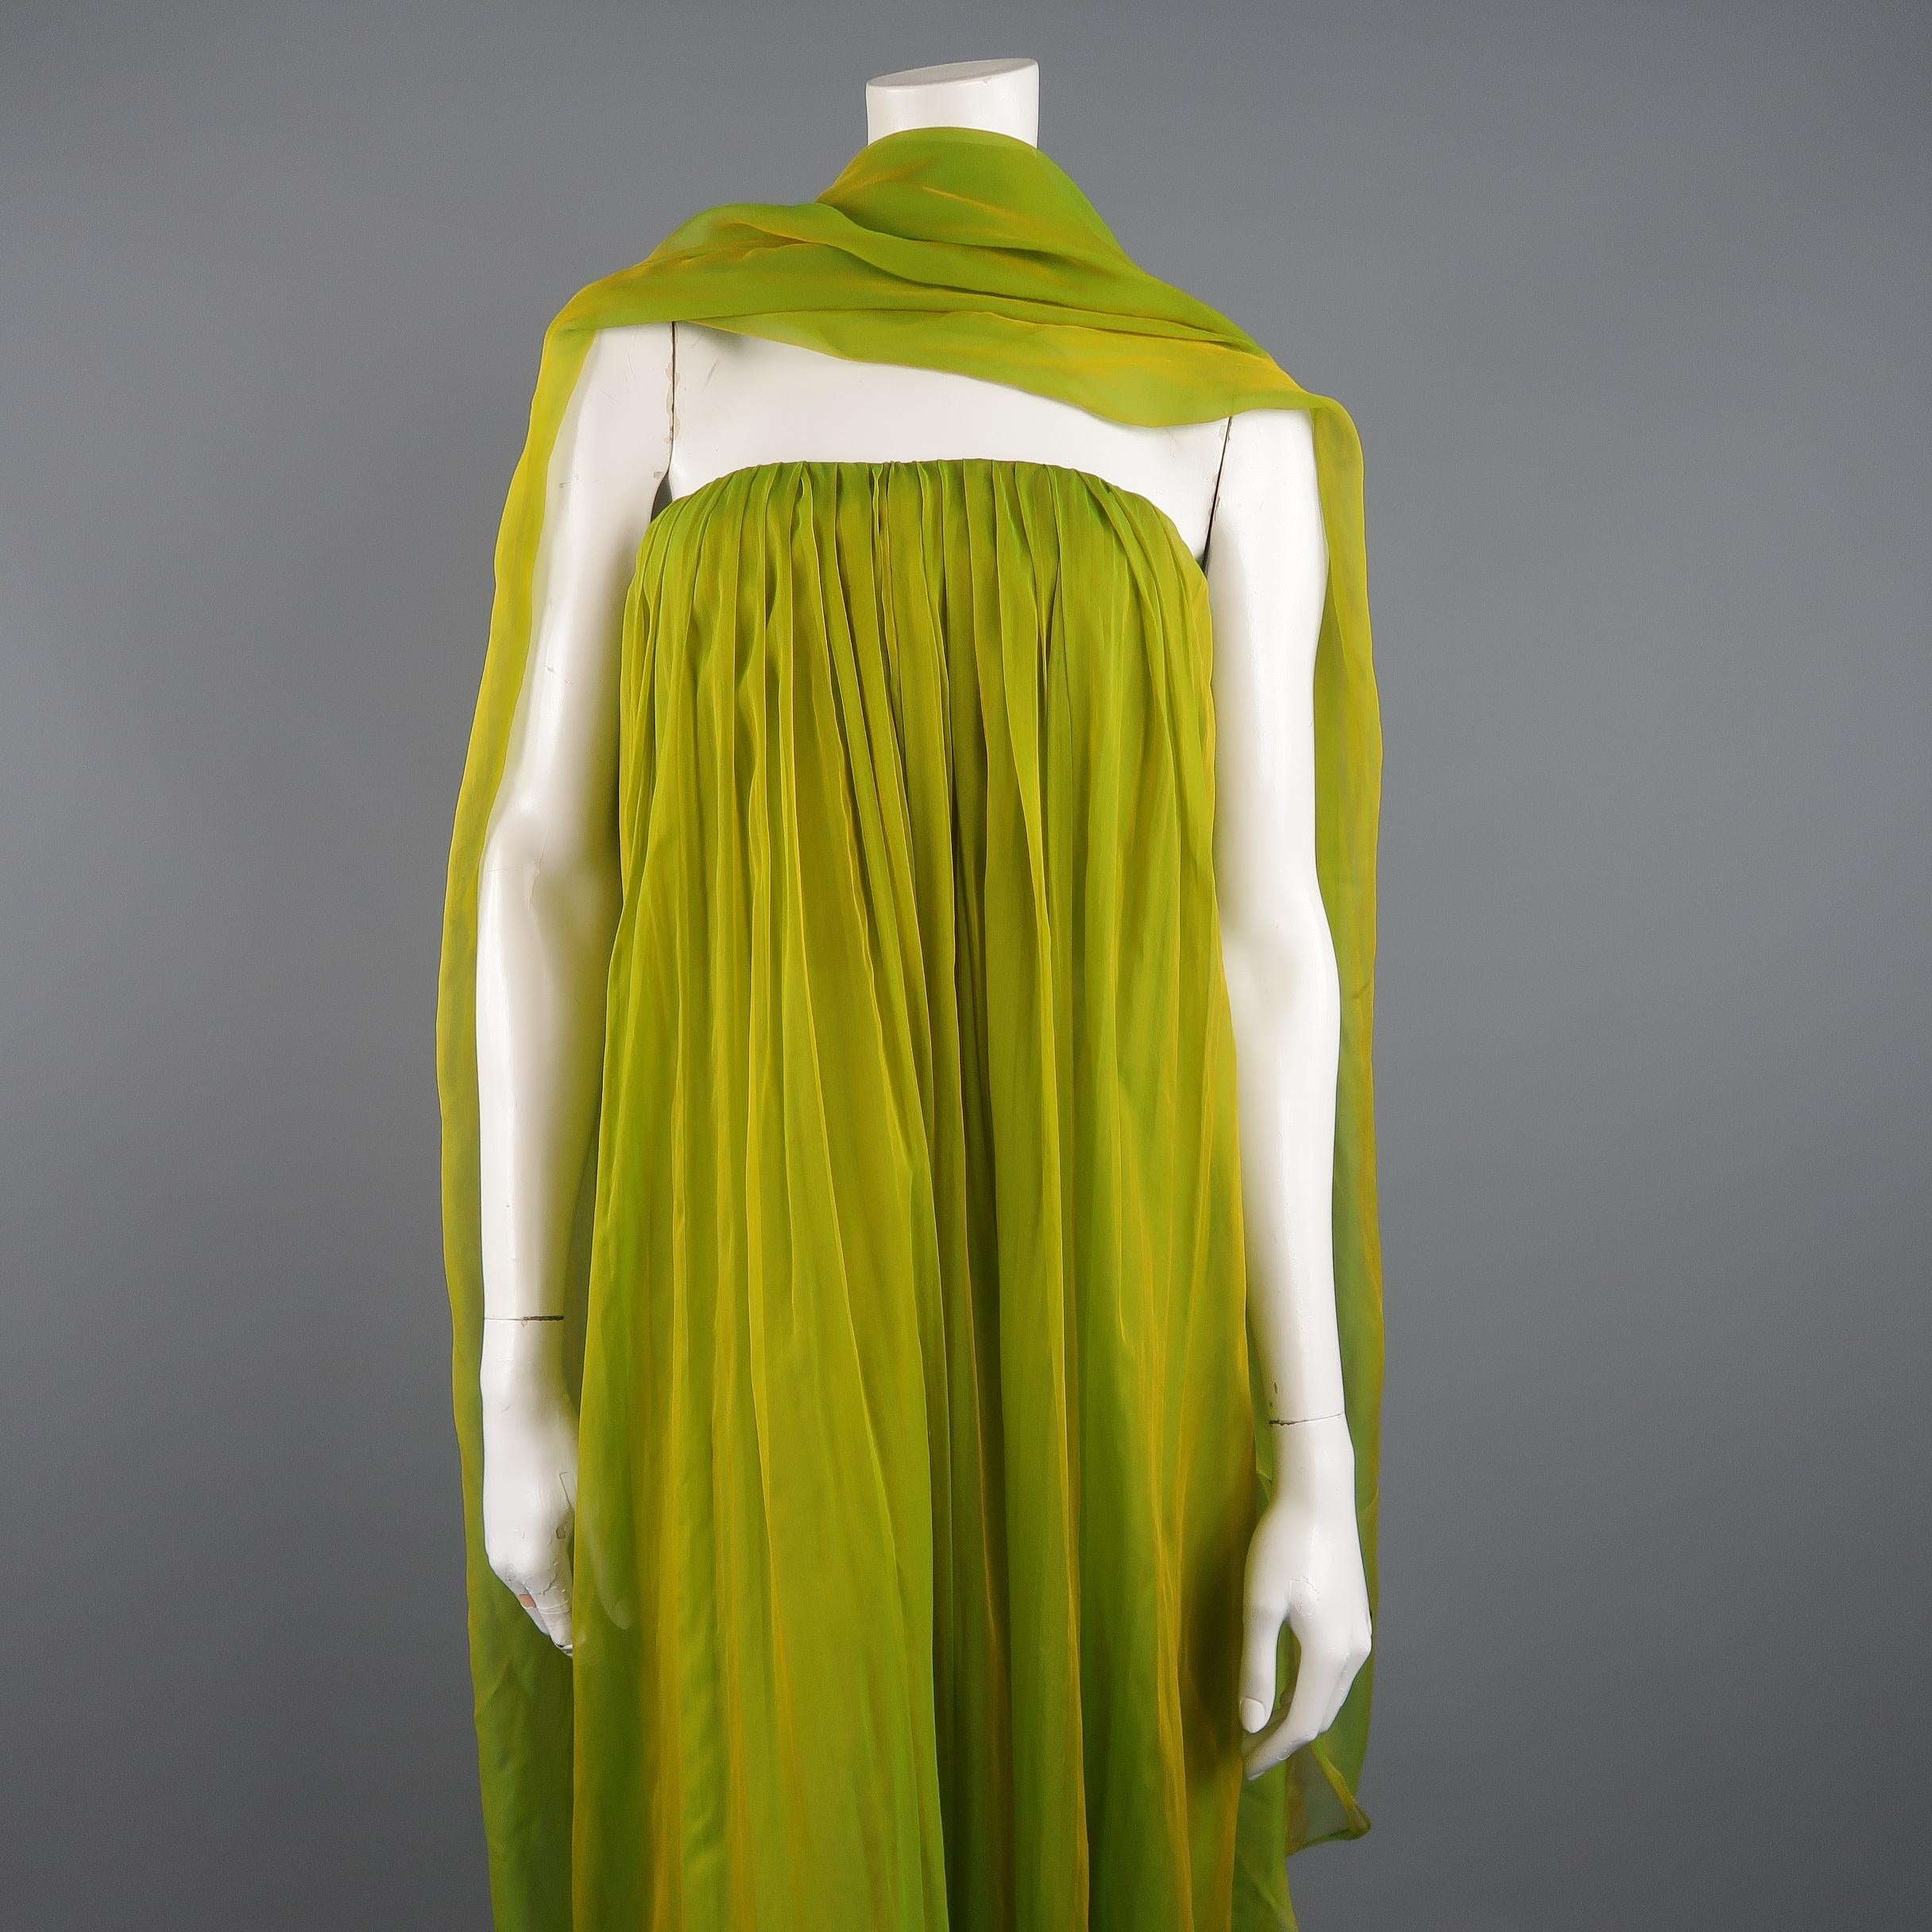 CAROLYNE ROEHM strapless gown comes in an iridescent green silk chiffon with a golden sheen and features a bustier top with pleated front and A line silhouette. Includes a matching chiffon shawl and extra panel of fabric. Wear on shawl. As-is. Made